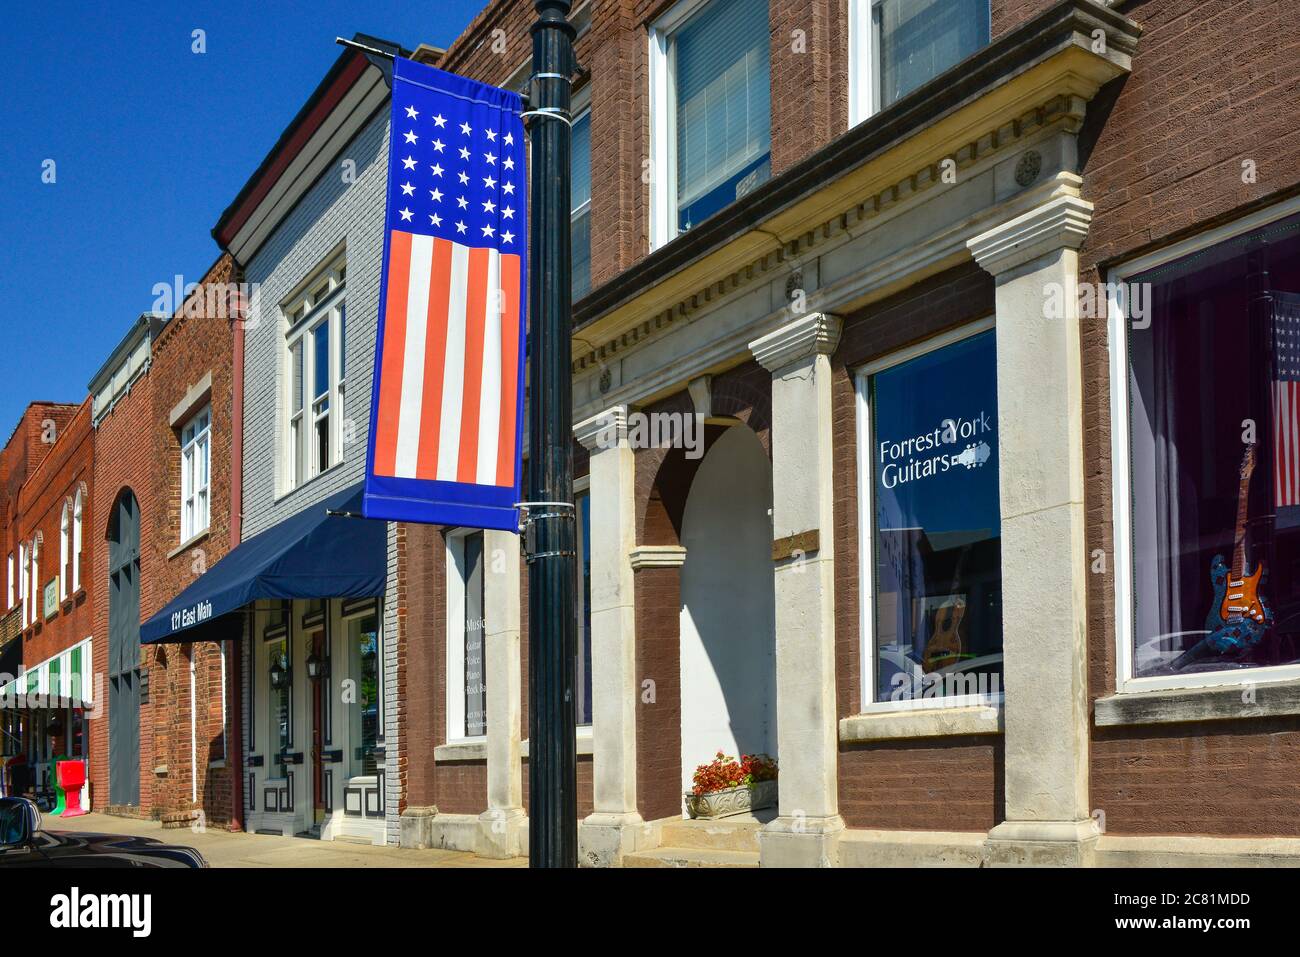 A guitar store with window displays on the town square in historic Murfreesboro, TN Stock Photo